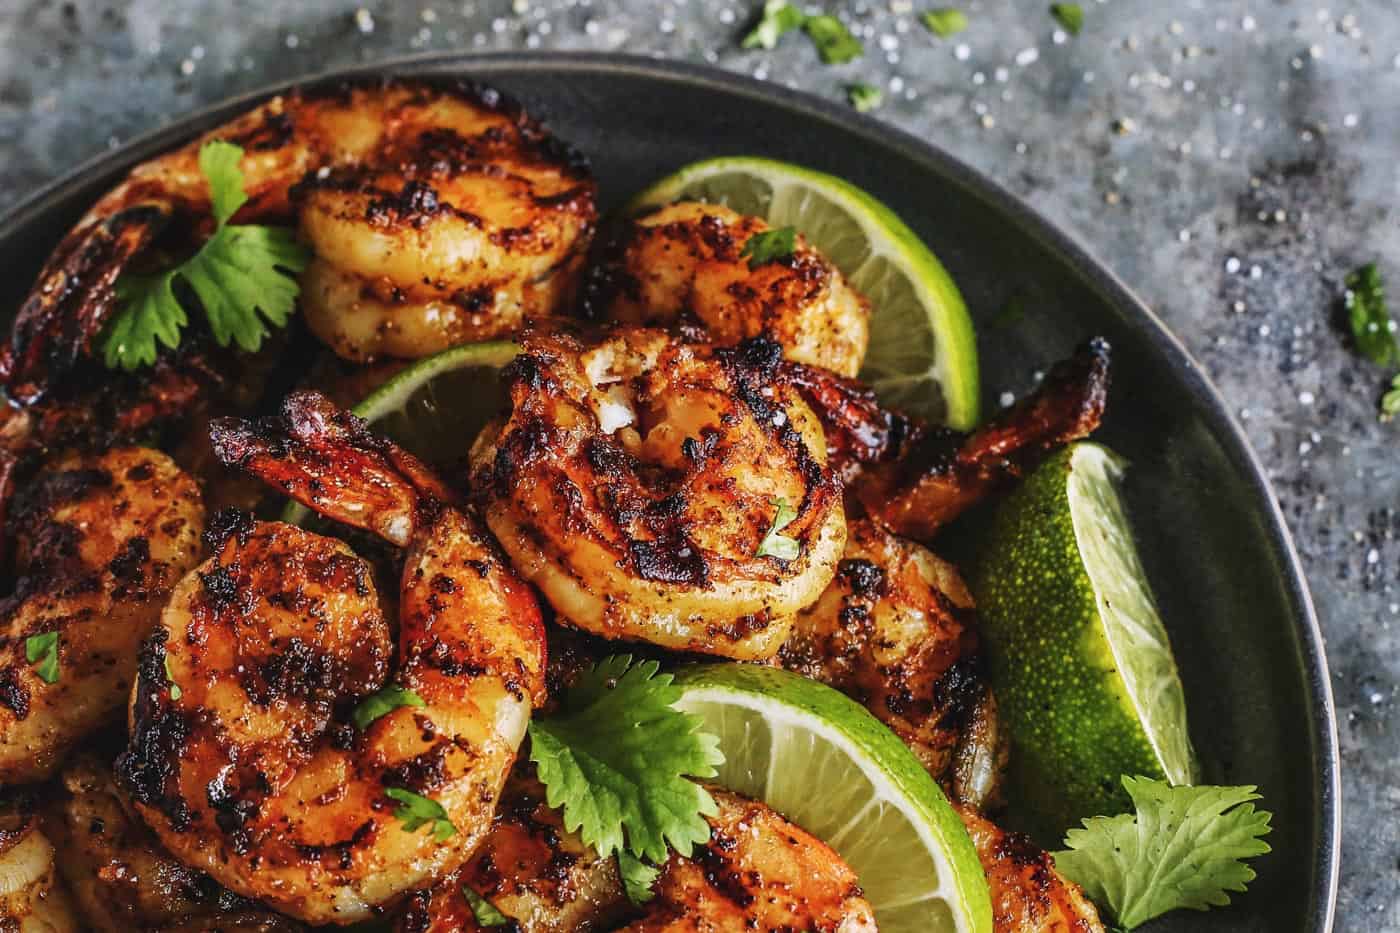 grilled shrimp with charred grill lines